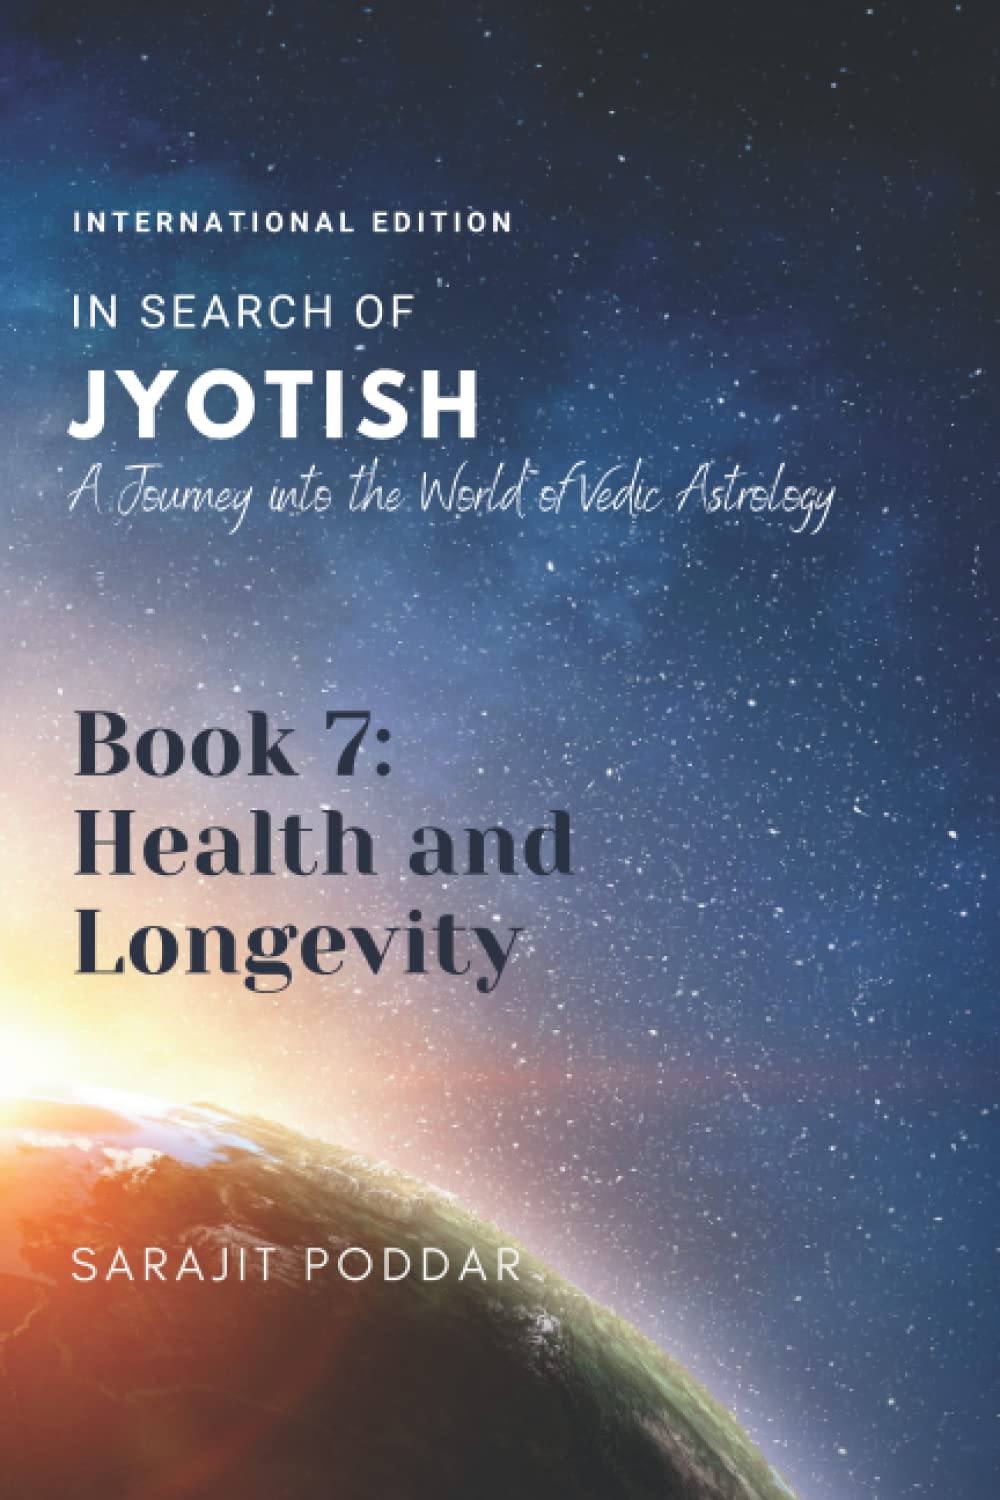 Health and Longevity: A Journey into the World of Vedic Astrology